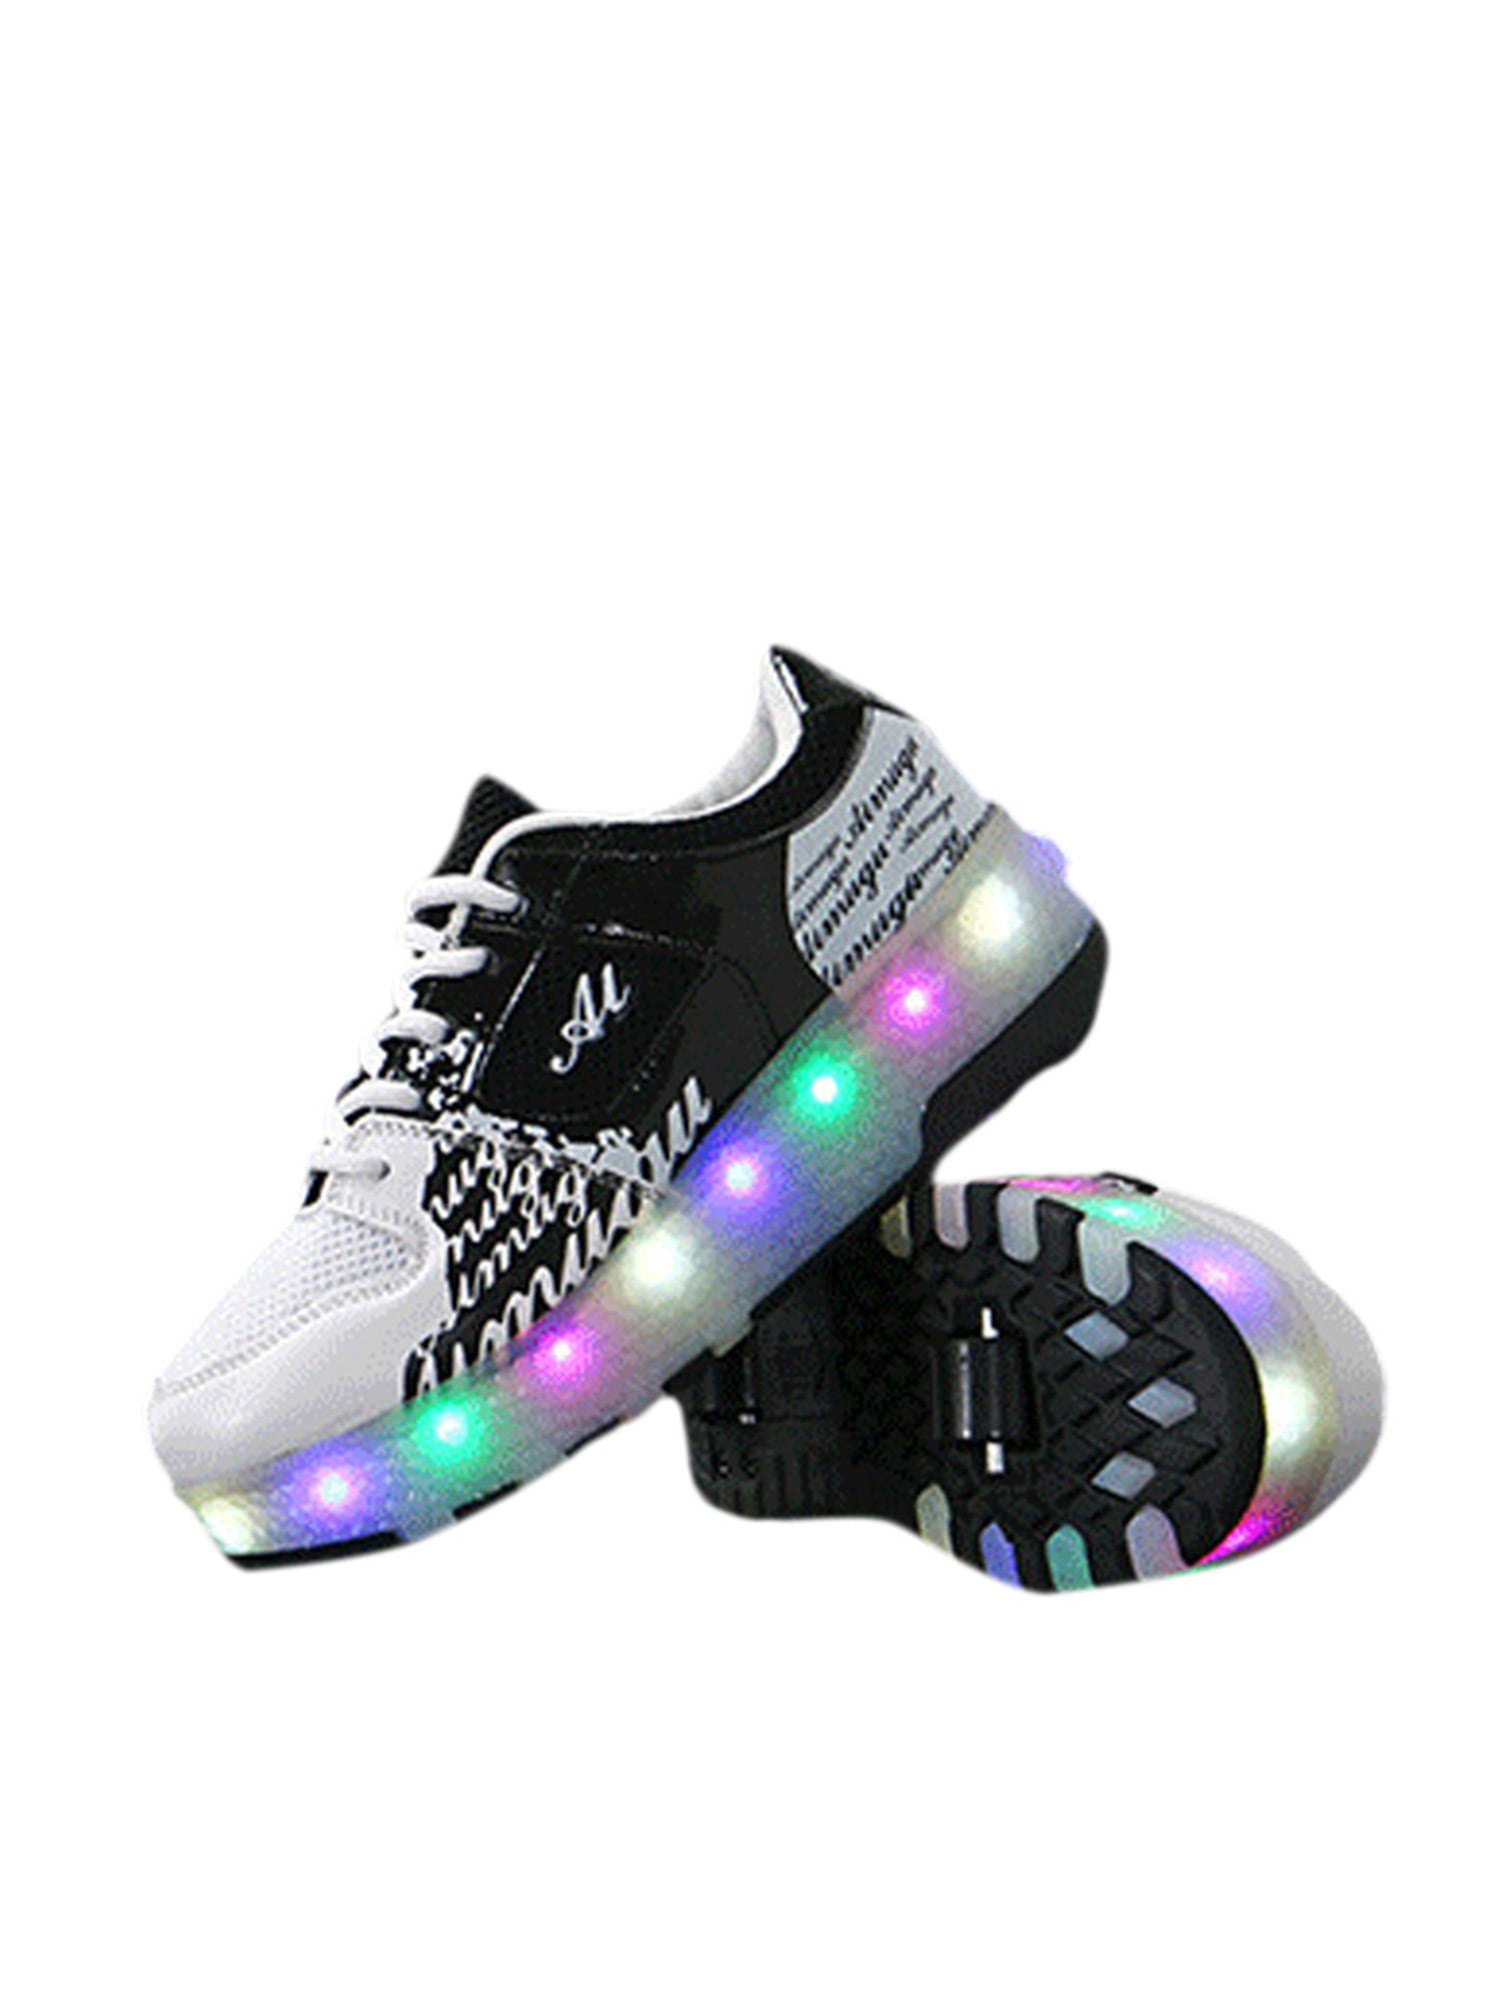 Kids Boys Girls Light Up Shoes LED Flashing Trainers Casual Sneakers Plus Size